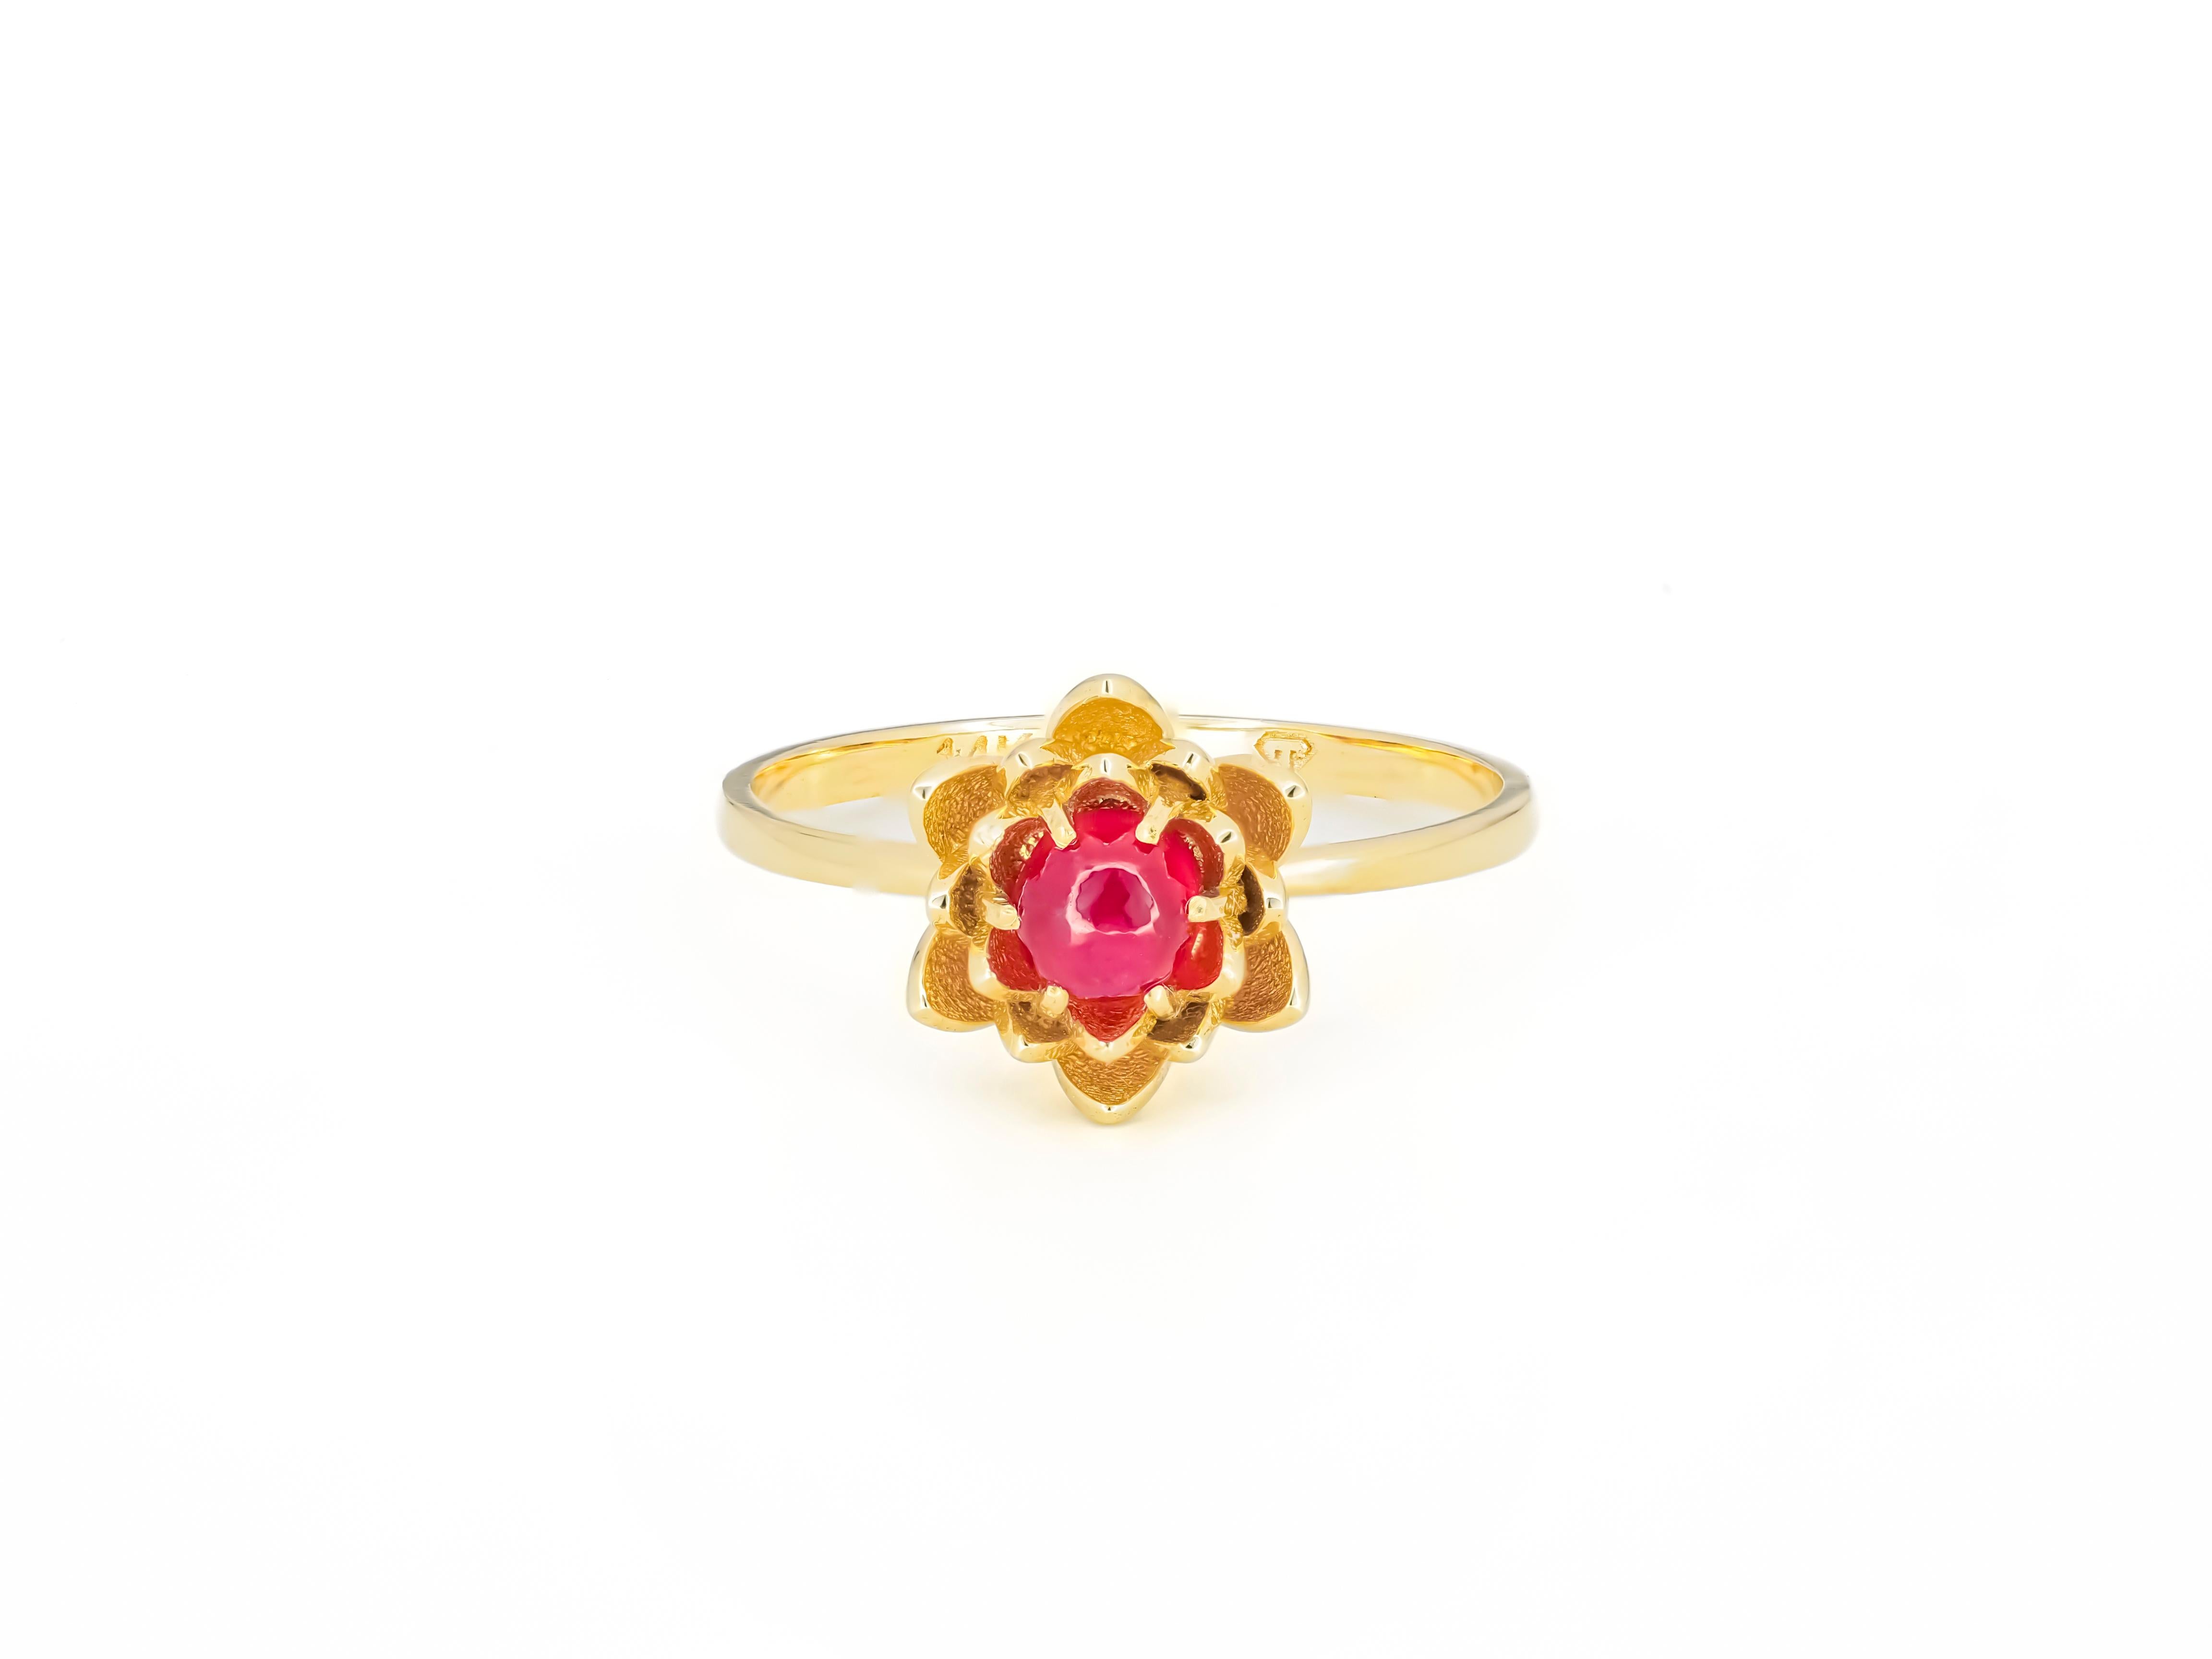 Ruby gold ring in 14k gold. 
Lotus flower ring. Ruby cabochon ring. Round ruby ring. July birthstone ring. Gold flower ring with ruby.

Metal: 14k solid gold
weigh: 2.2 gr (depends from size)

Central stone: Ruby
Weight: 0.5 ct. (4.5 mm)
Pinkish red